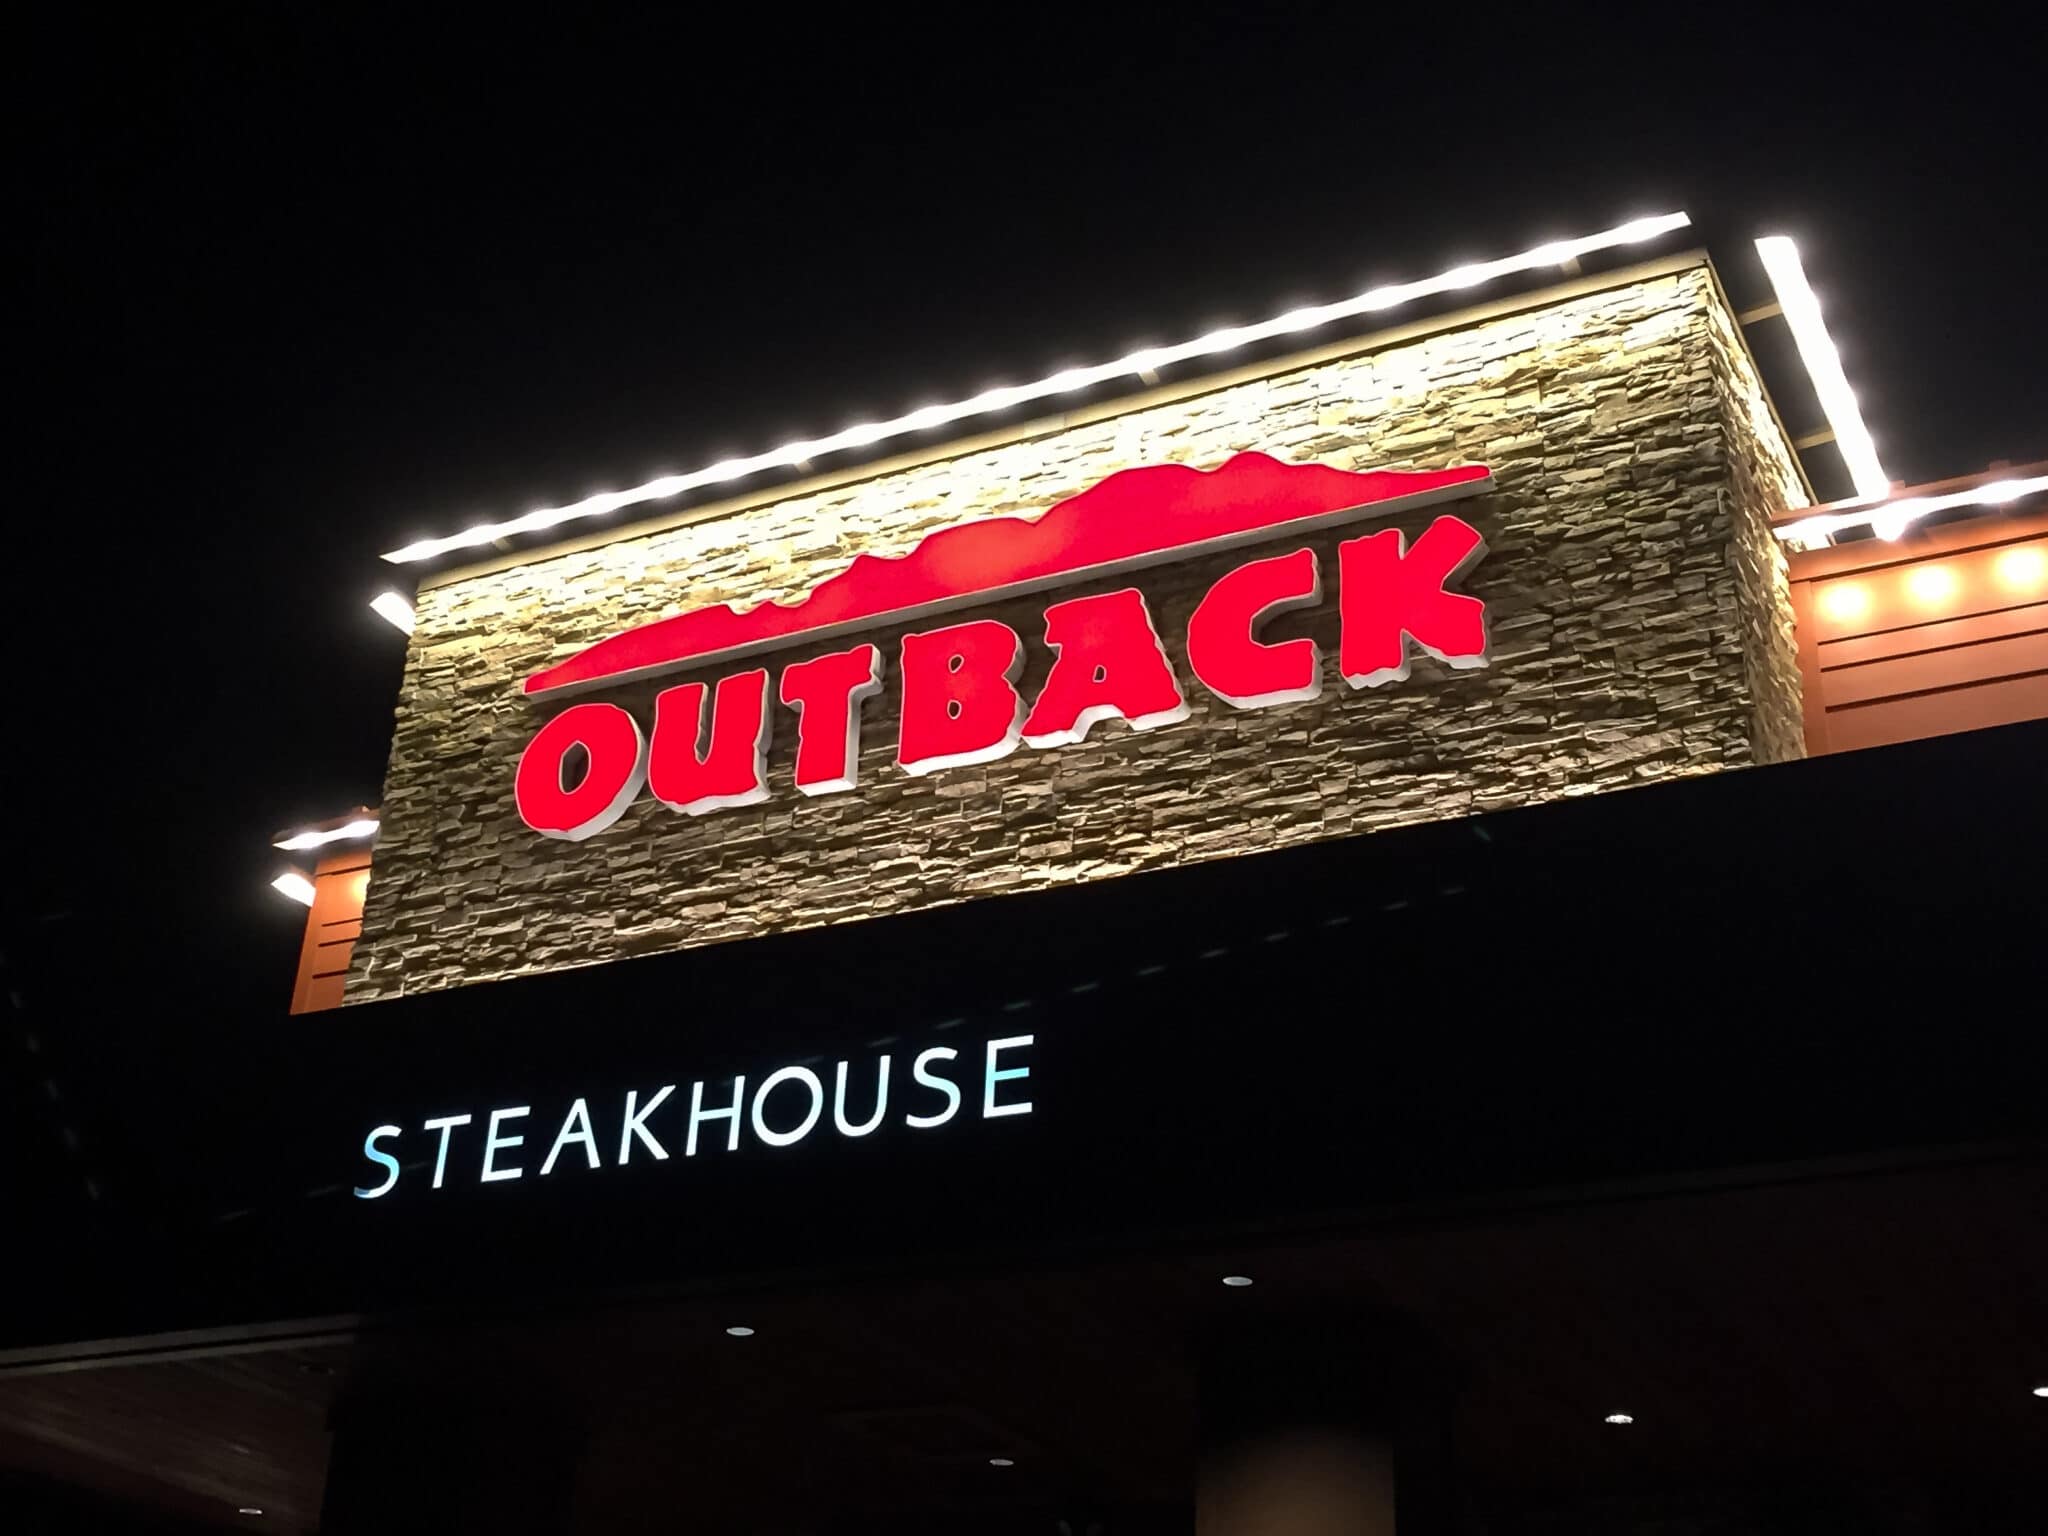 Outback Steakhouse evacuated after bomb threat